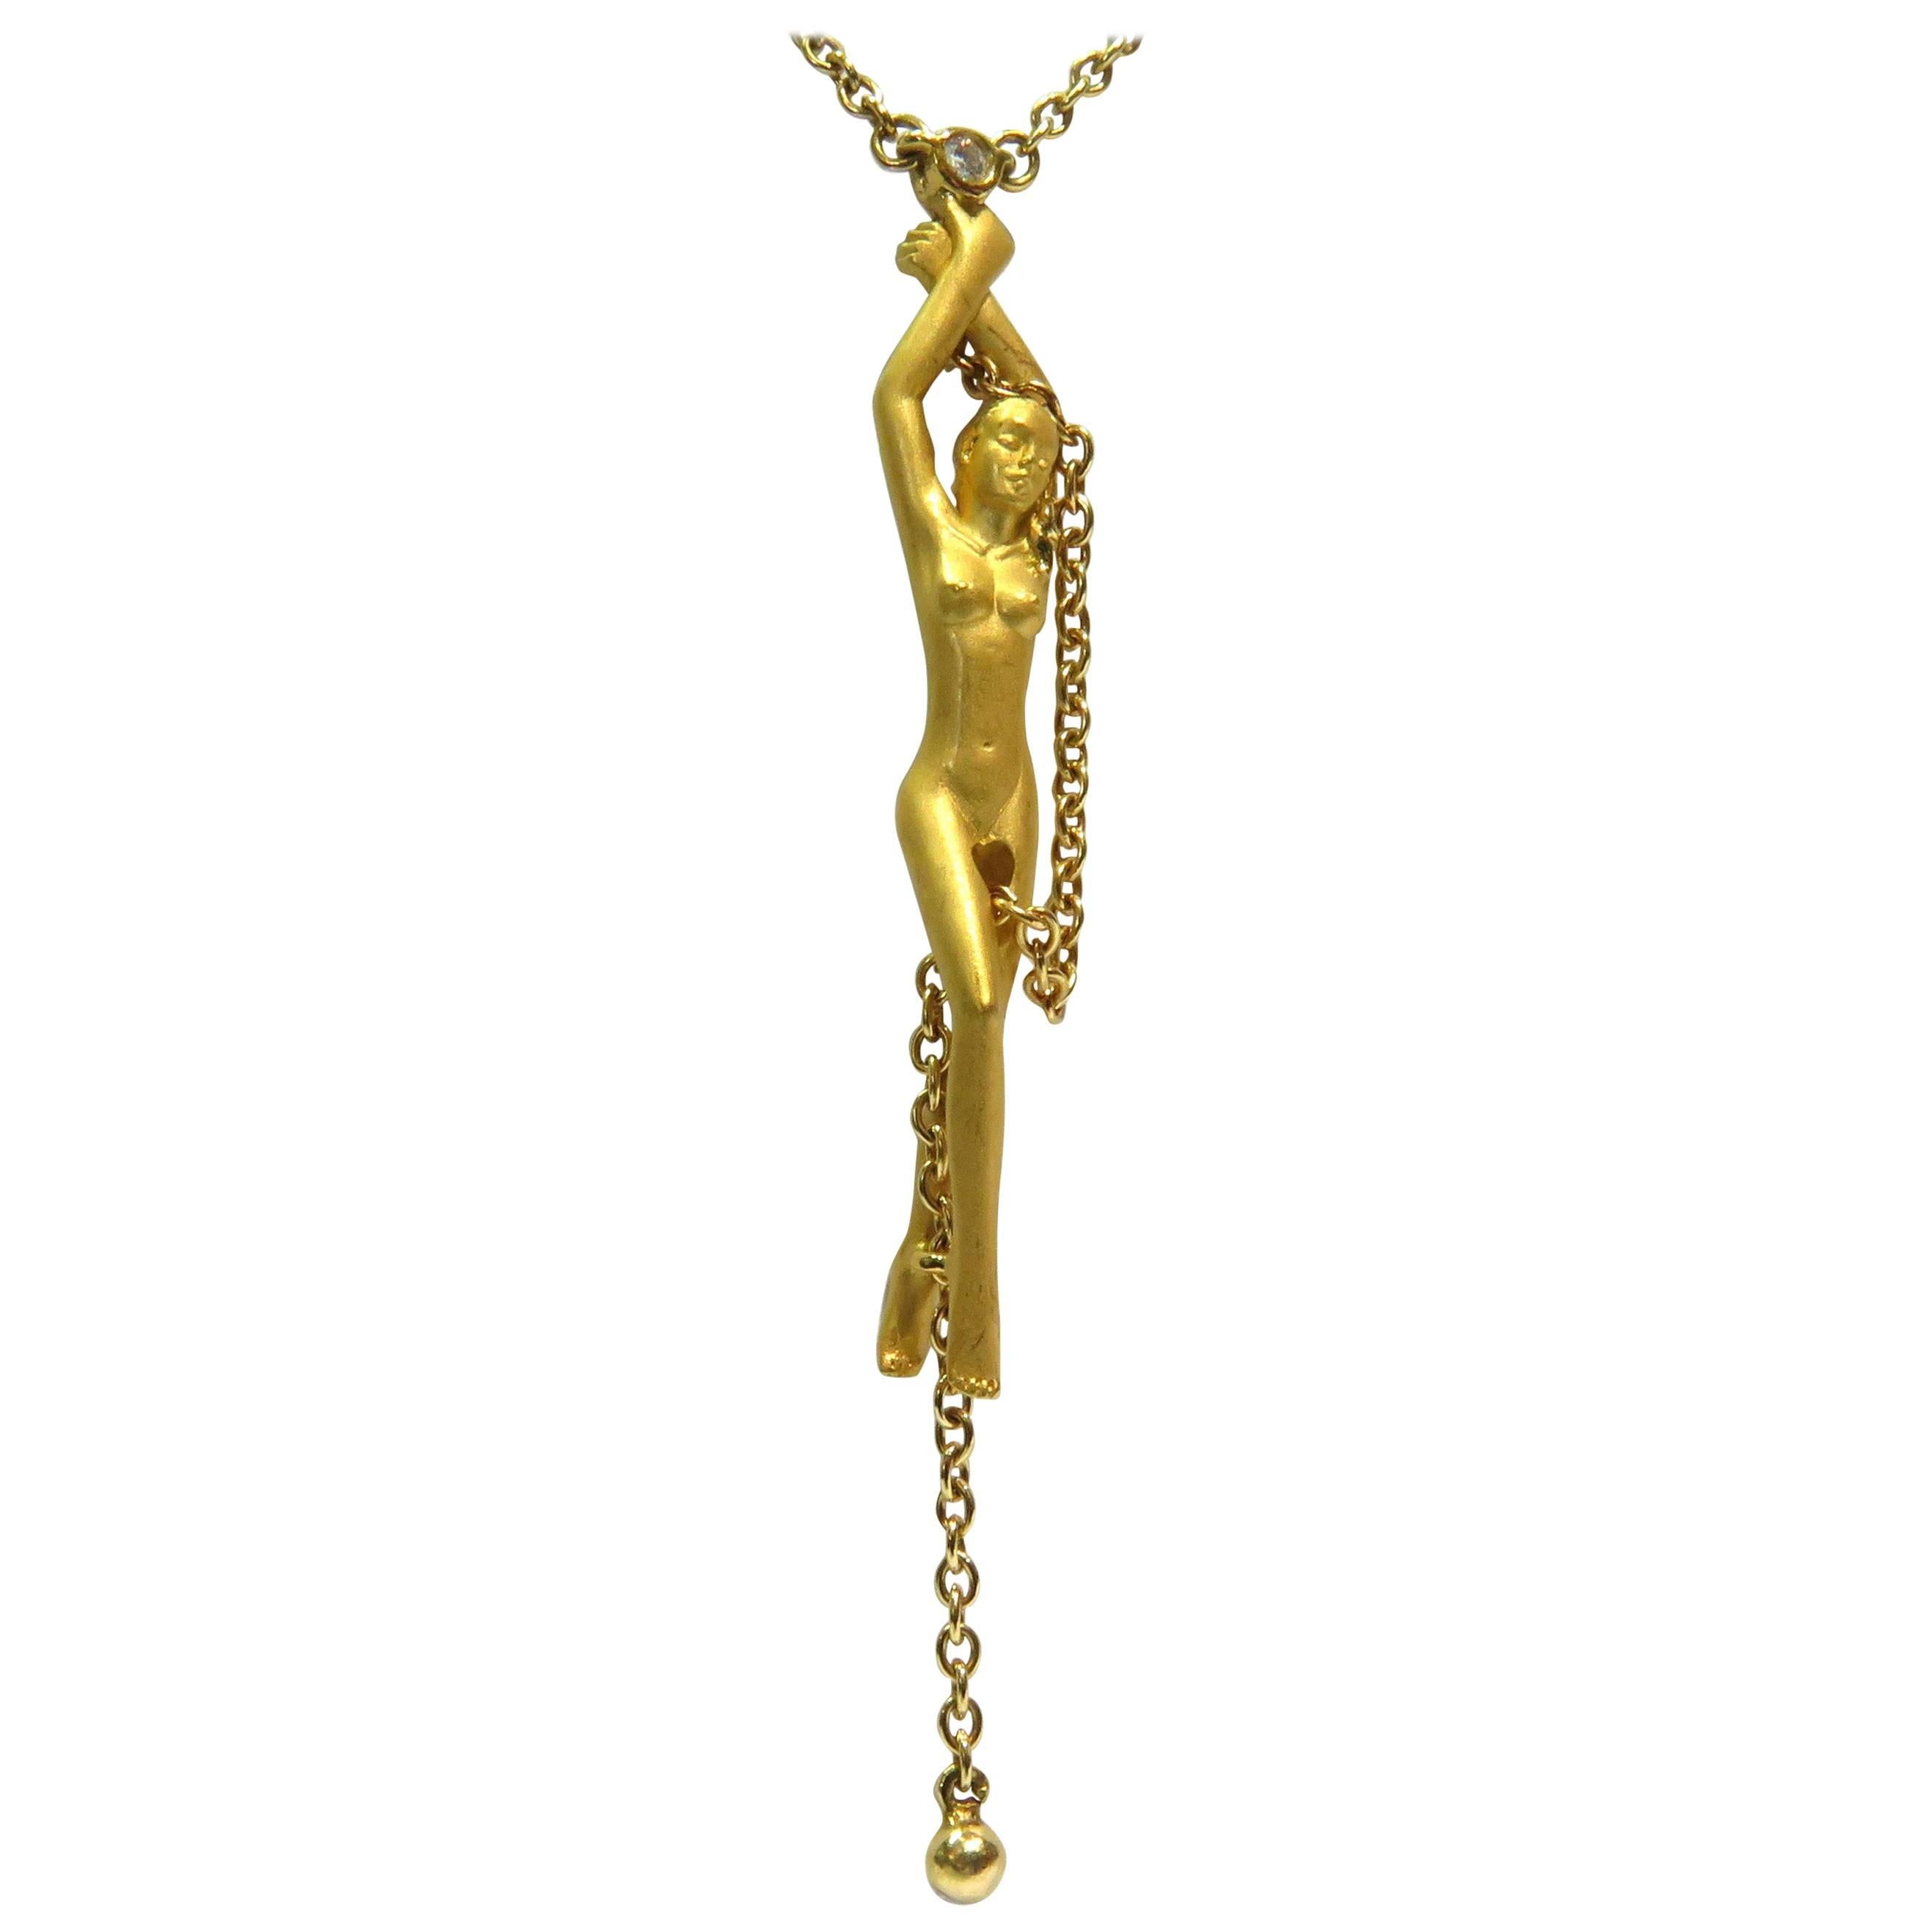 Carrera y Carrera Diamond Gold Woman with Chains Necklace